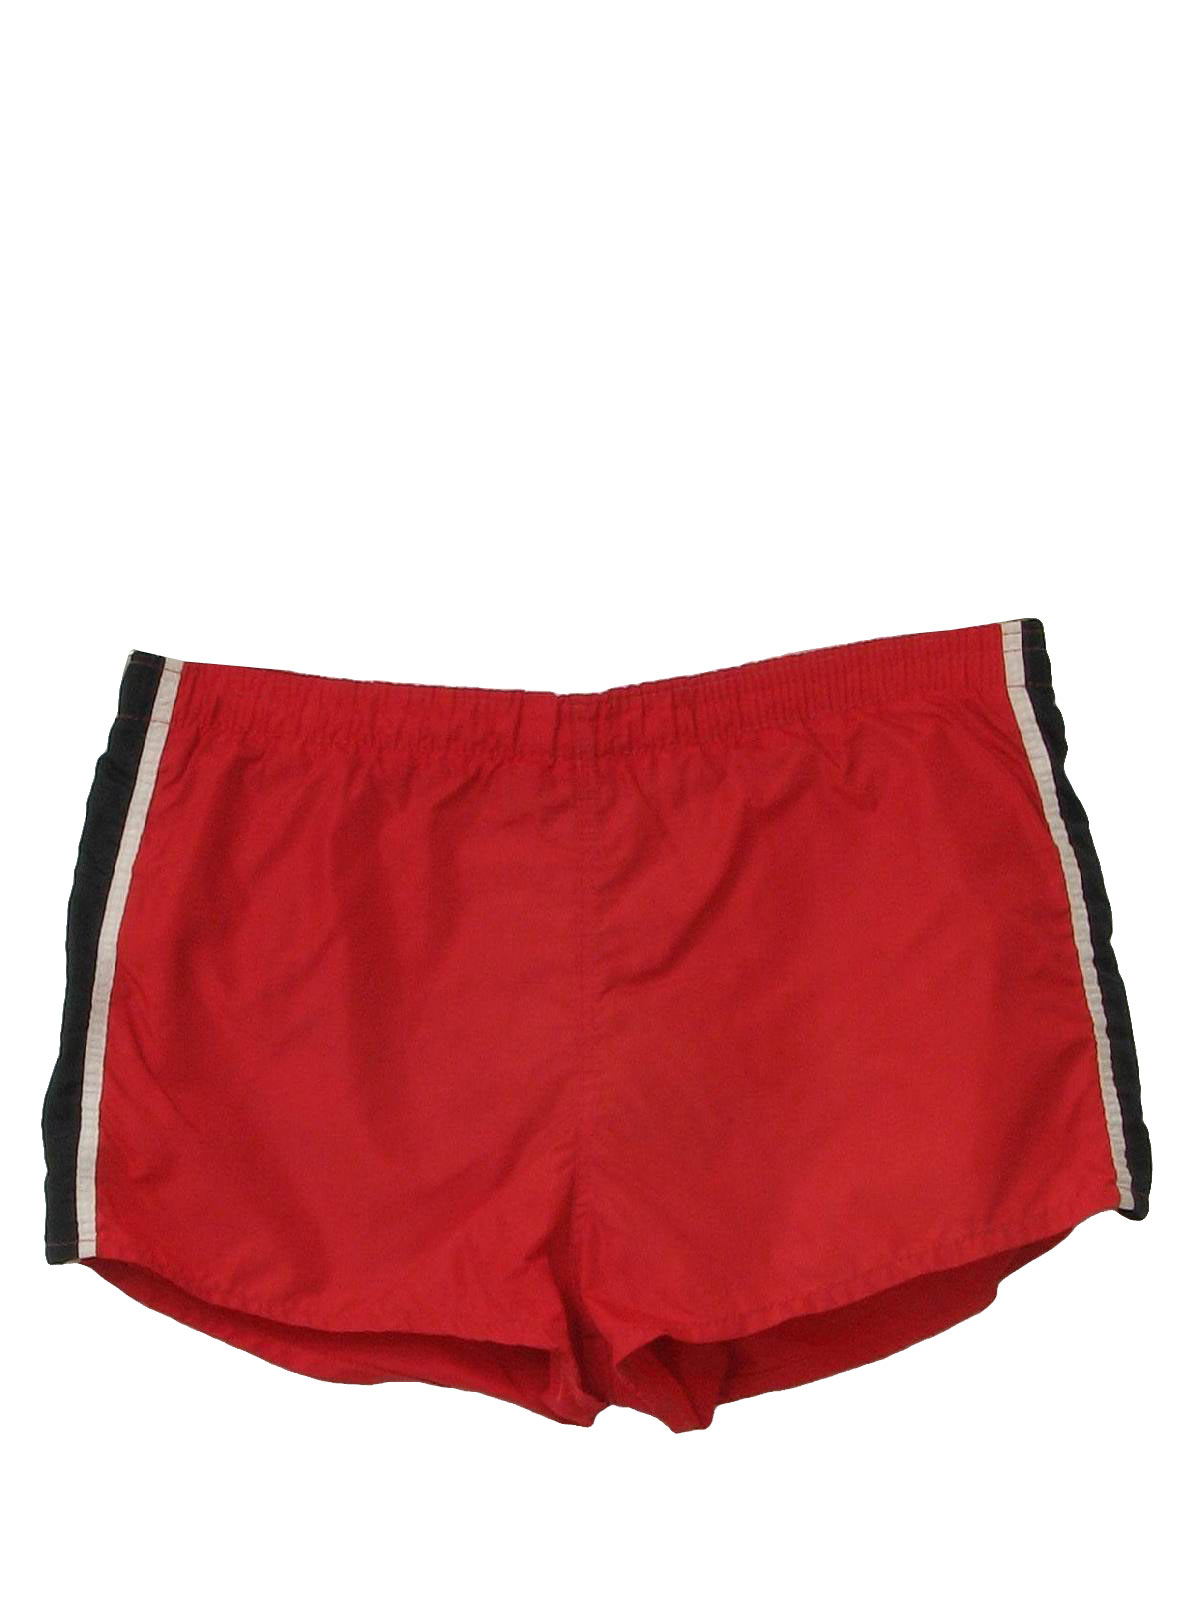 Vintage 1980's Shorts: 80s -Nike Made in USA- Mens red background nylon ...